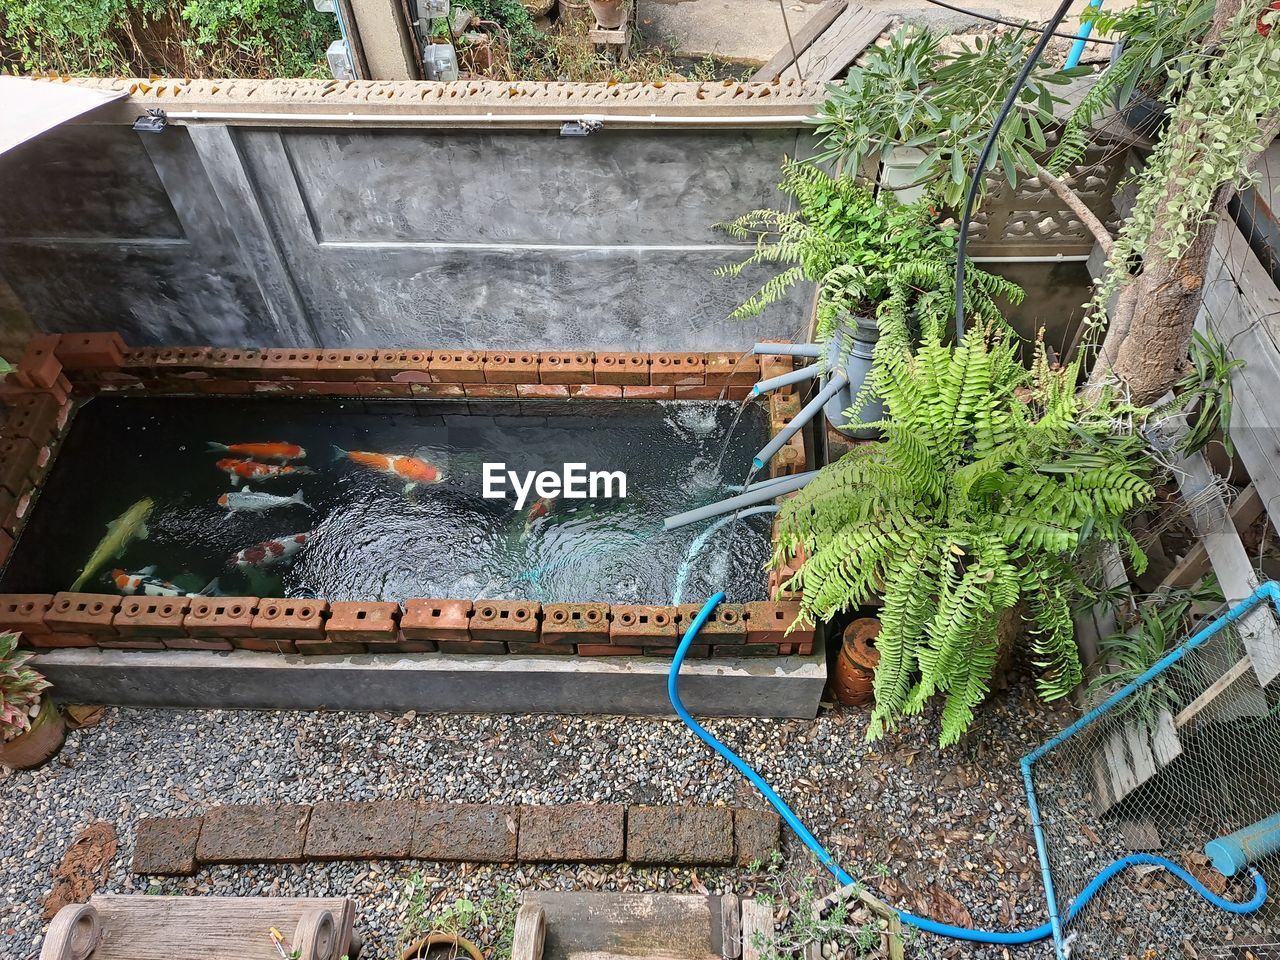 HIGH ANGLE VIEW OF POTTED PLANTS IN YARD AGAINST TREES